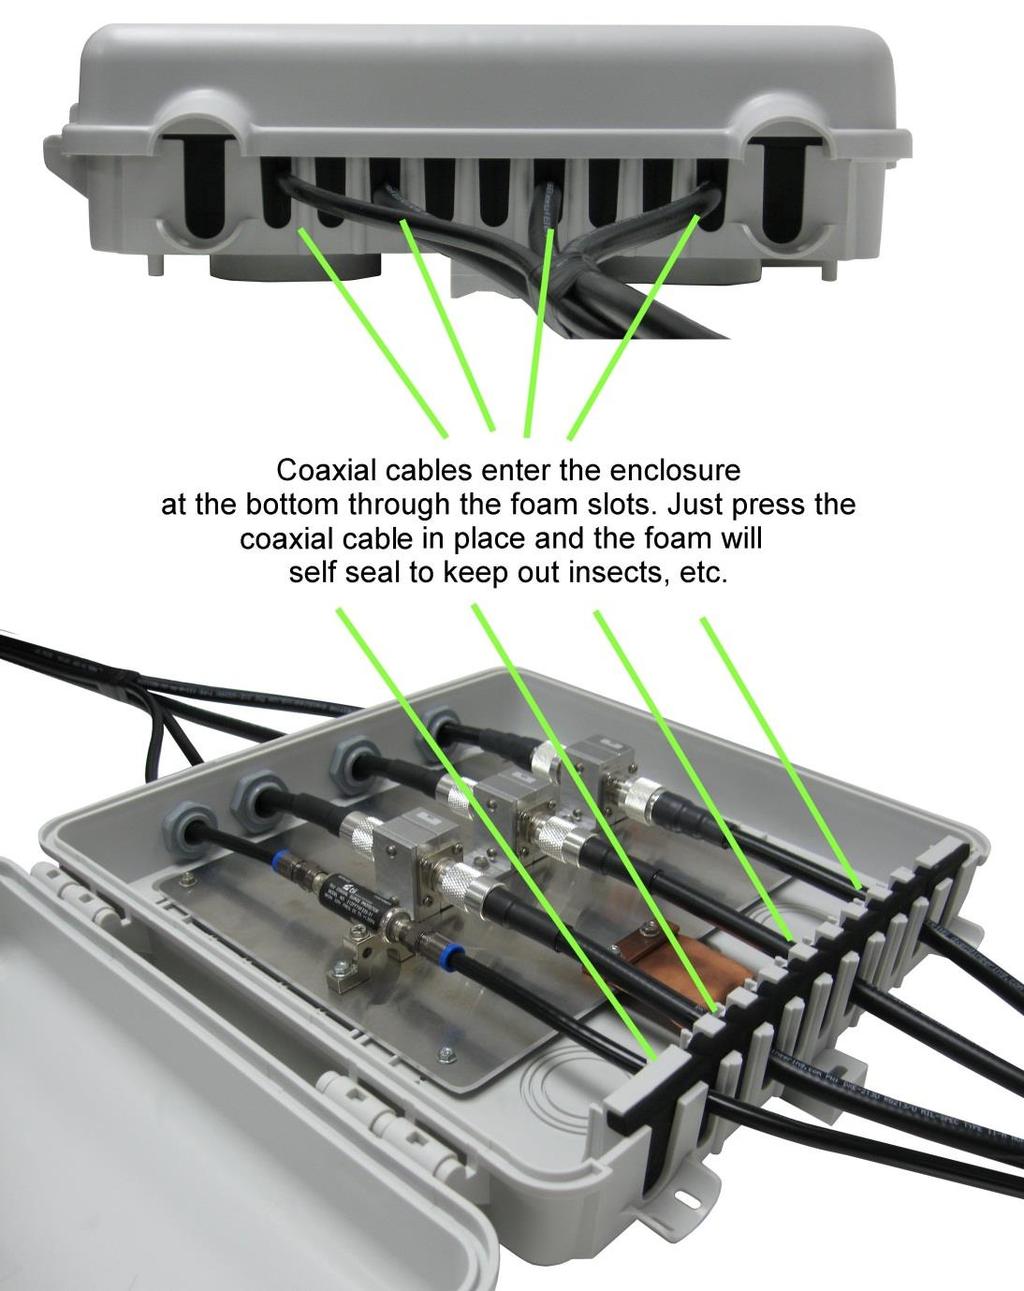 The coaxial cables enter the bottom of the enclosure through the foam lined slots. The coaxial cable presses easily into the foam. Press the cable firmly down until it bottoms out.